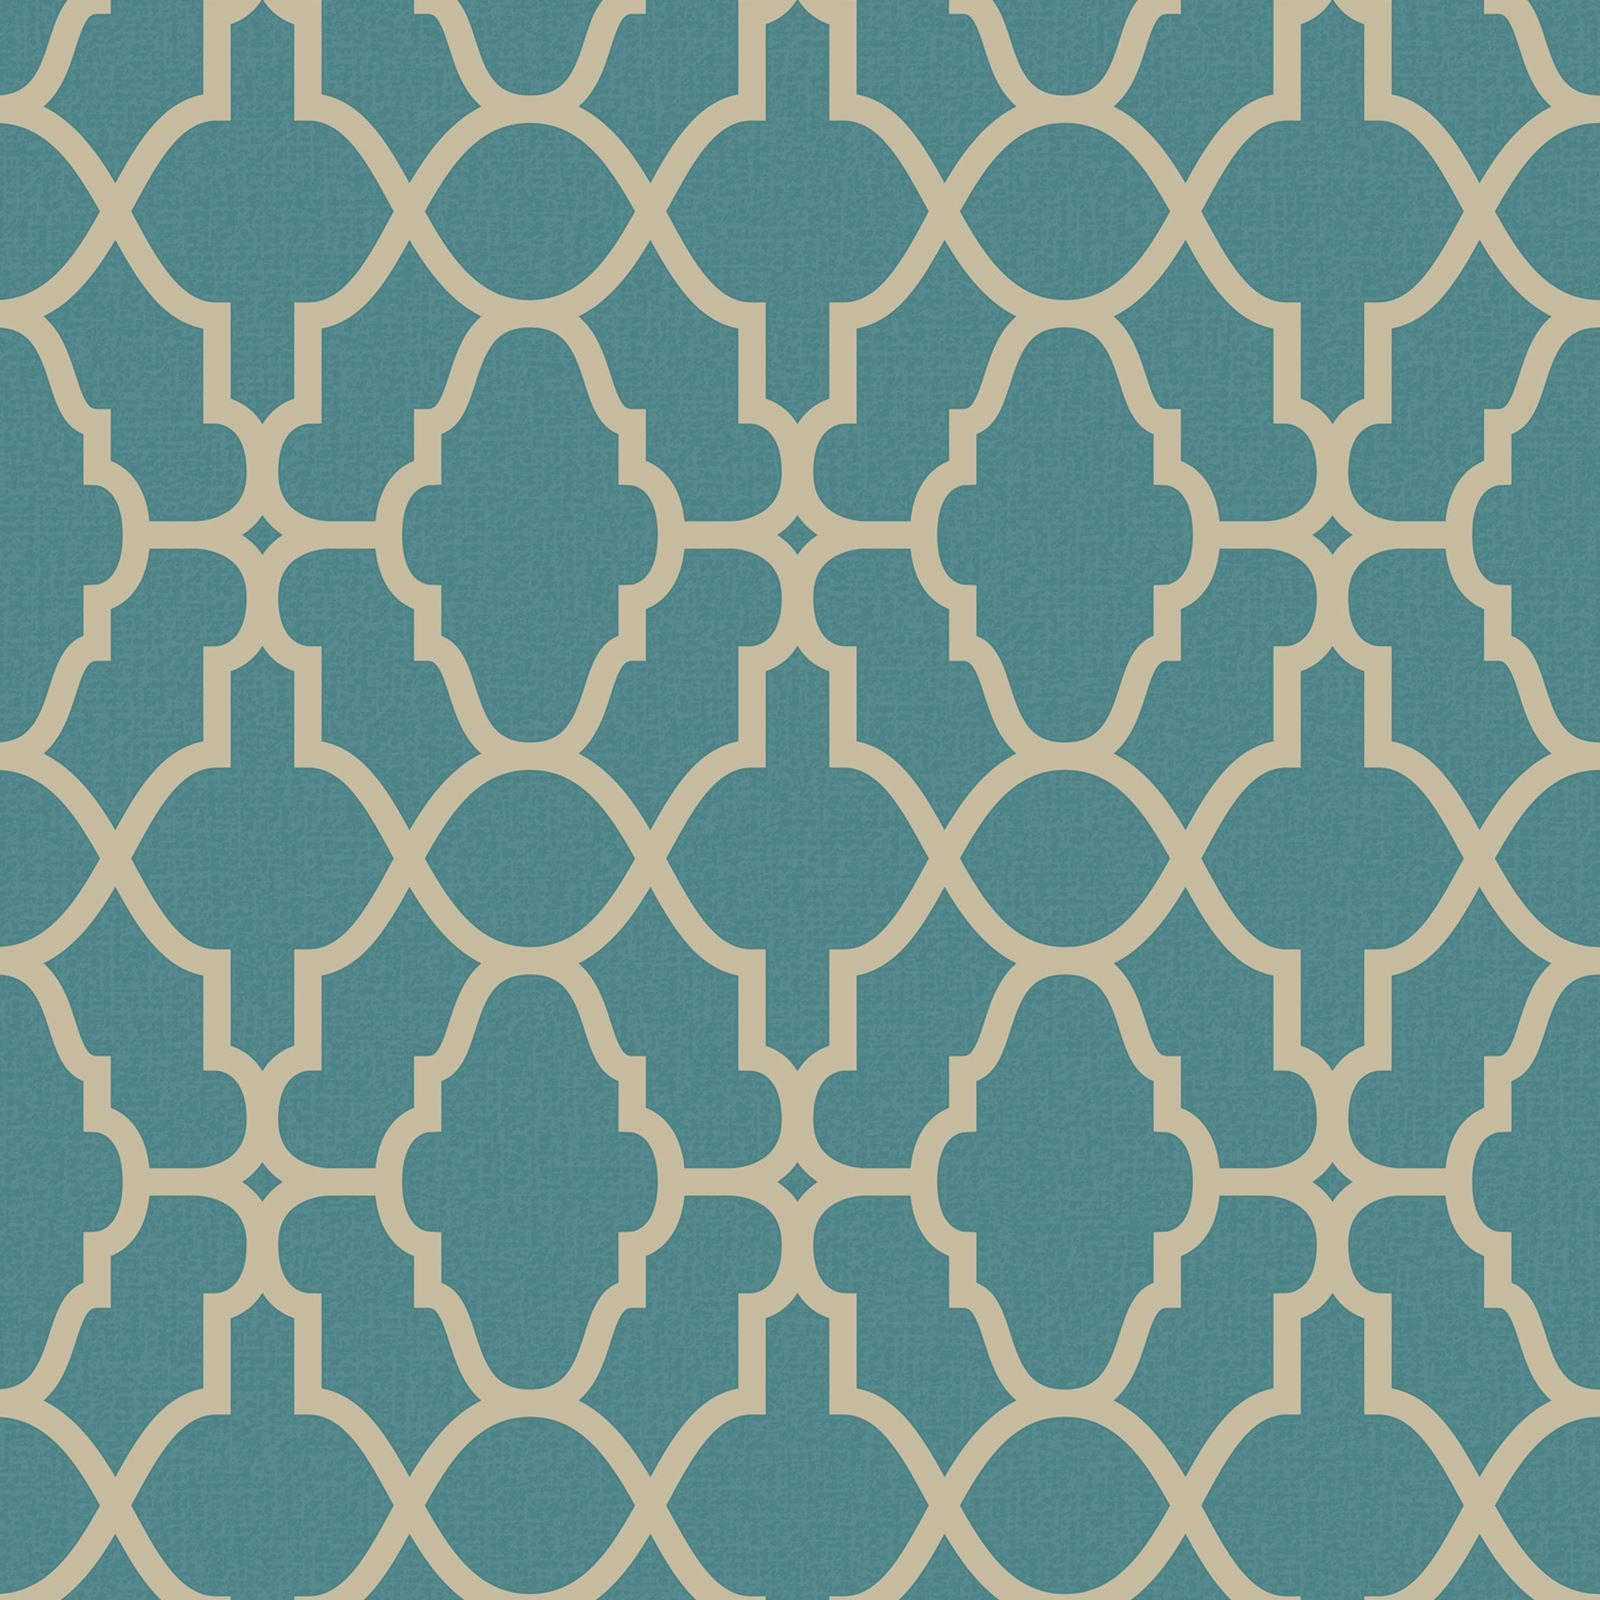 Teal and Pink Geometric Wallpaper, HD Teal and Pink Geometric Background on WallpaperBat